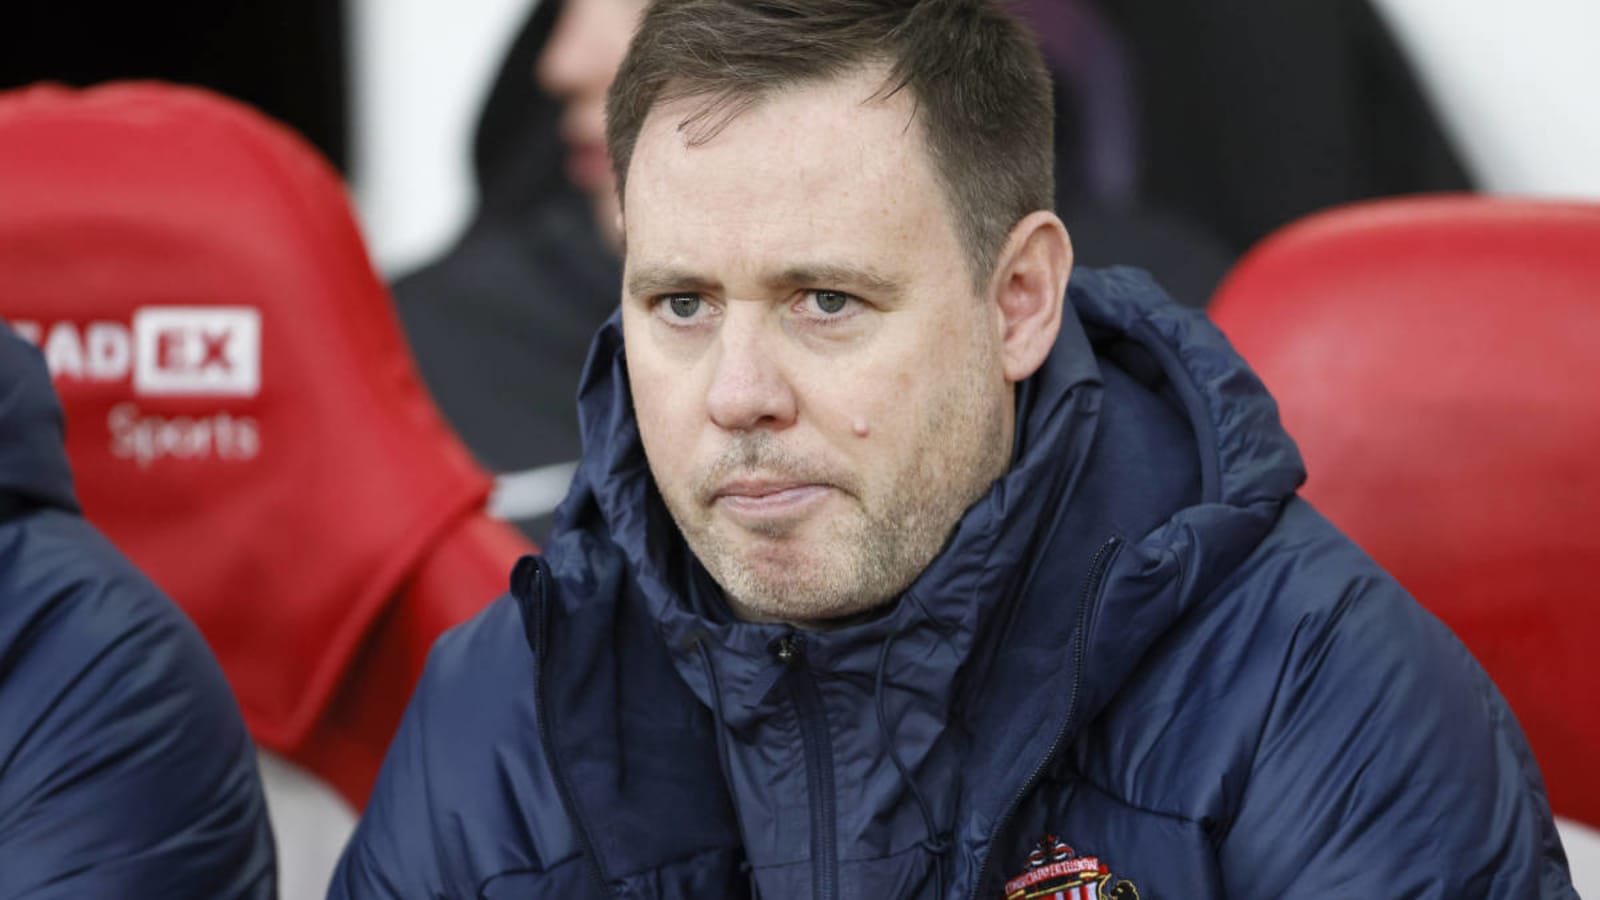 Attacking fans and alienating players: Five key mistakes that cost Michael Beale Sunderland job